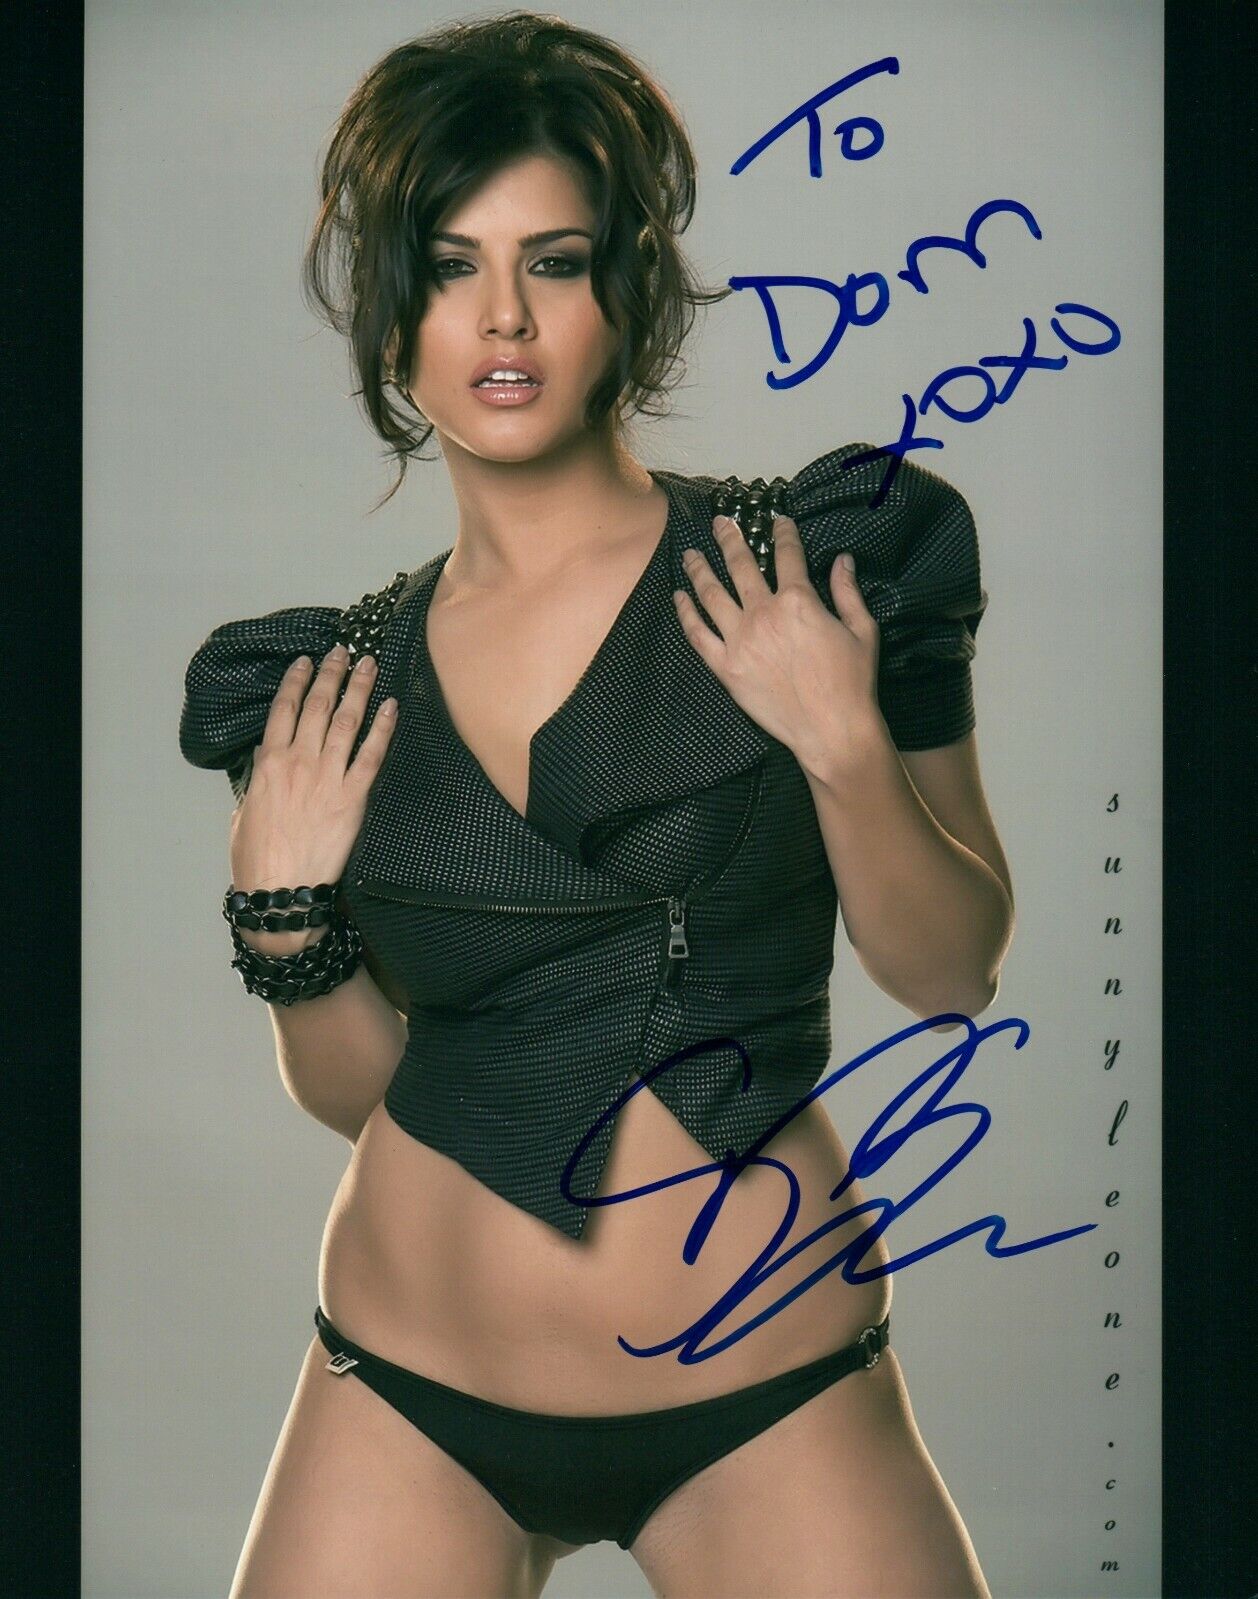 Sunny Leone Actress Model Hand Signed Autograph 8x10 Photo Poster painting